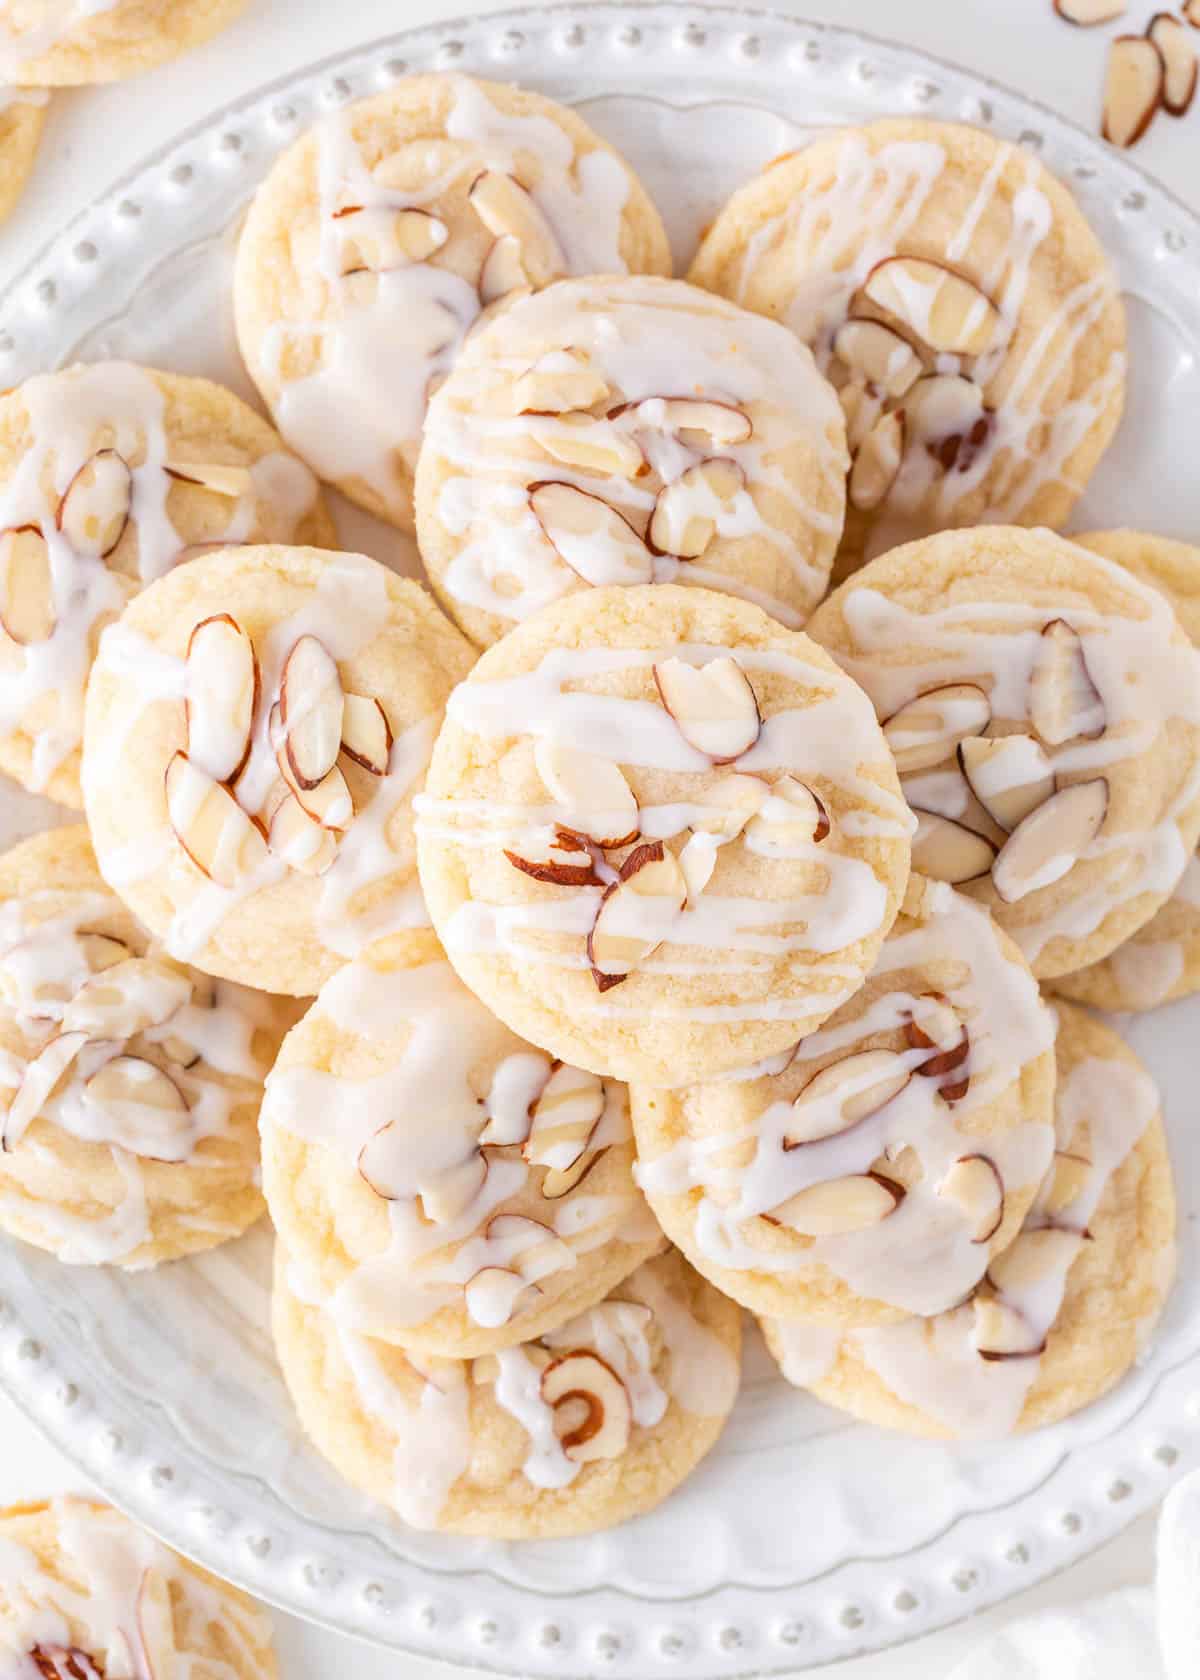 Almond cookies on a white plate.